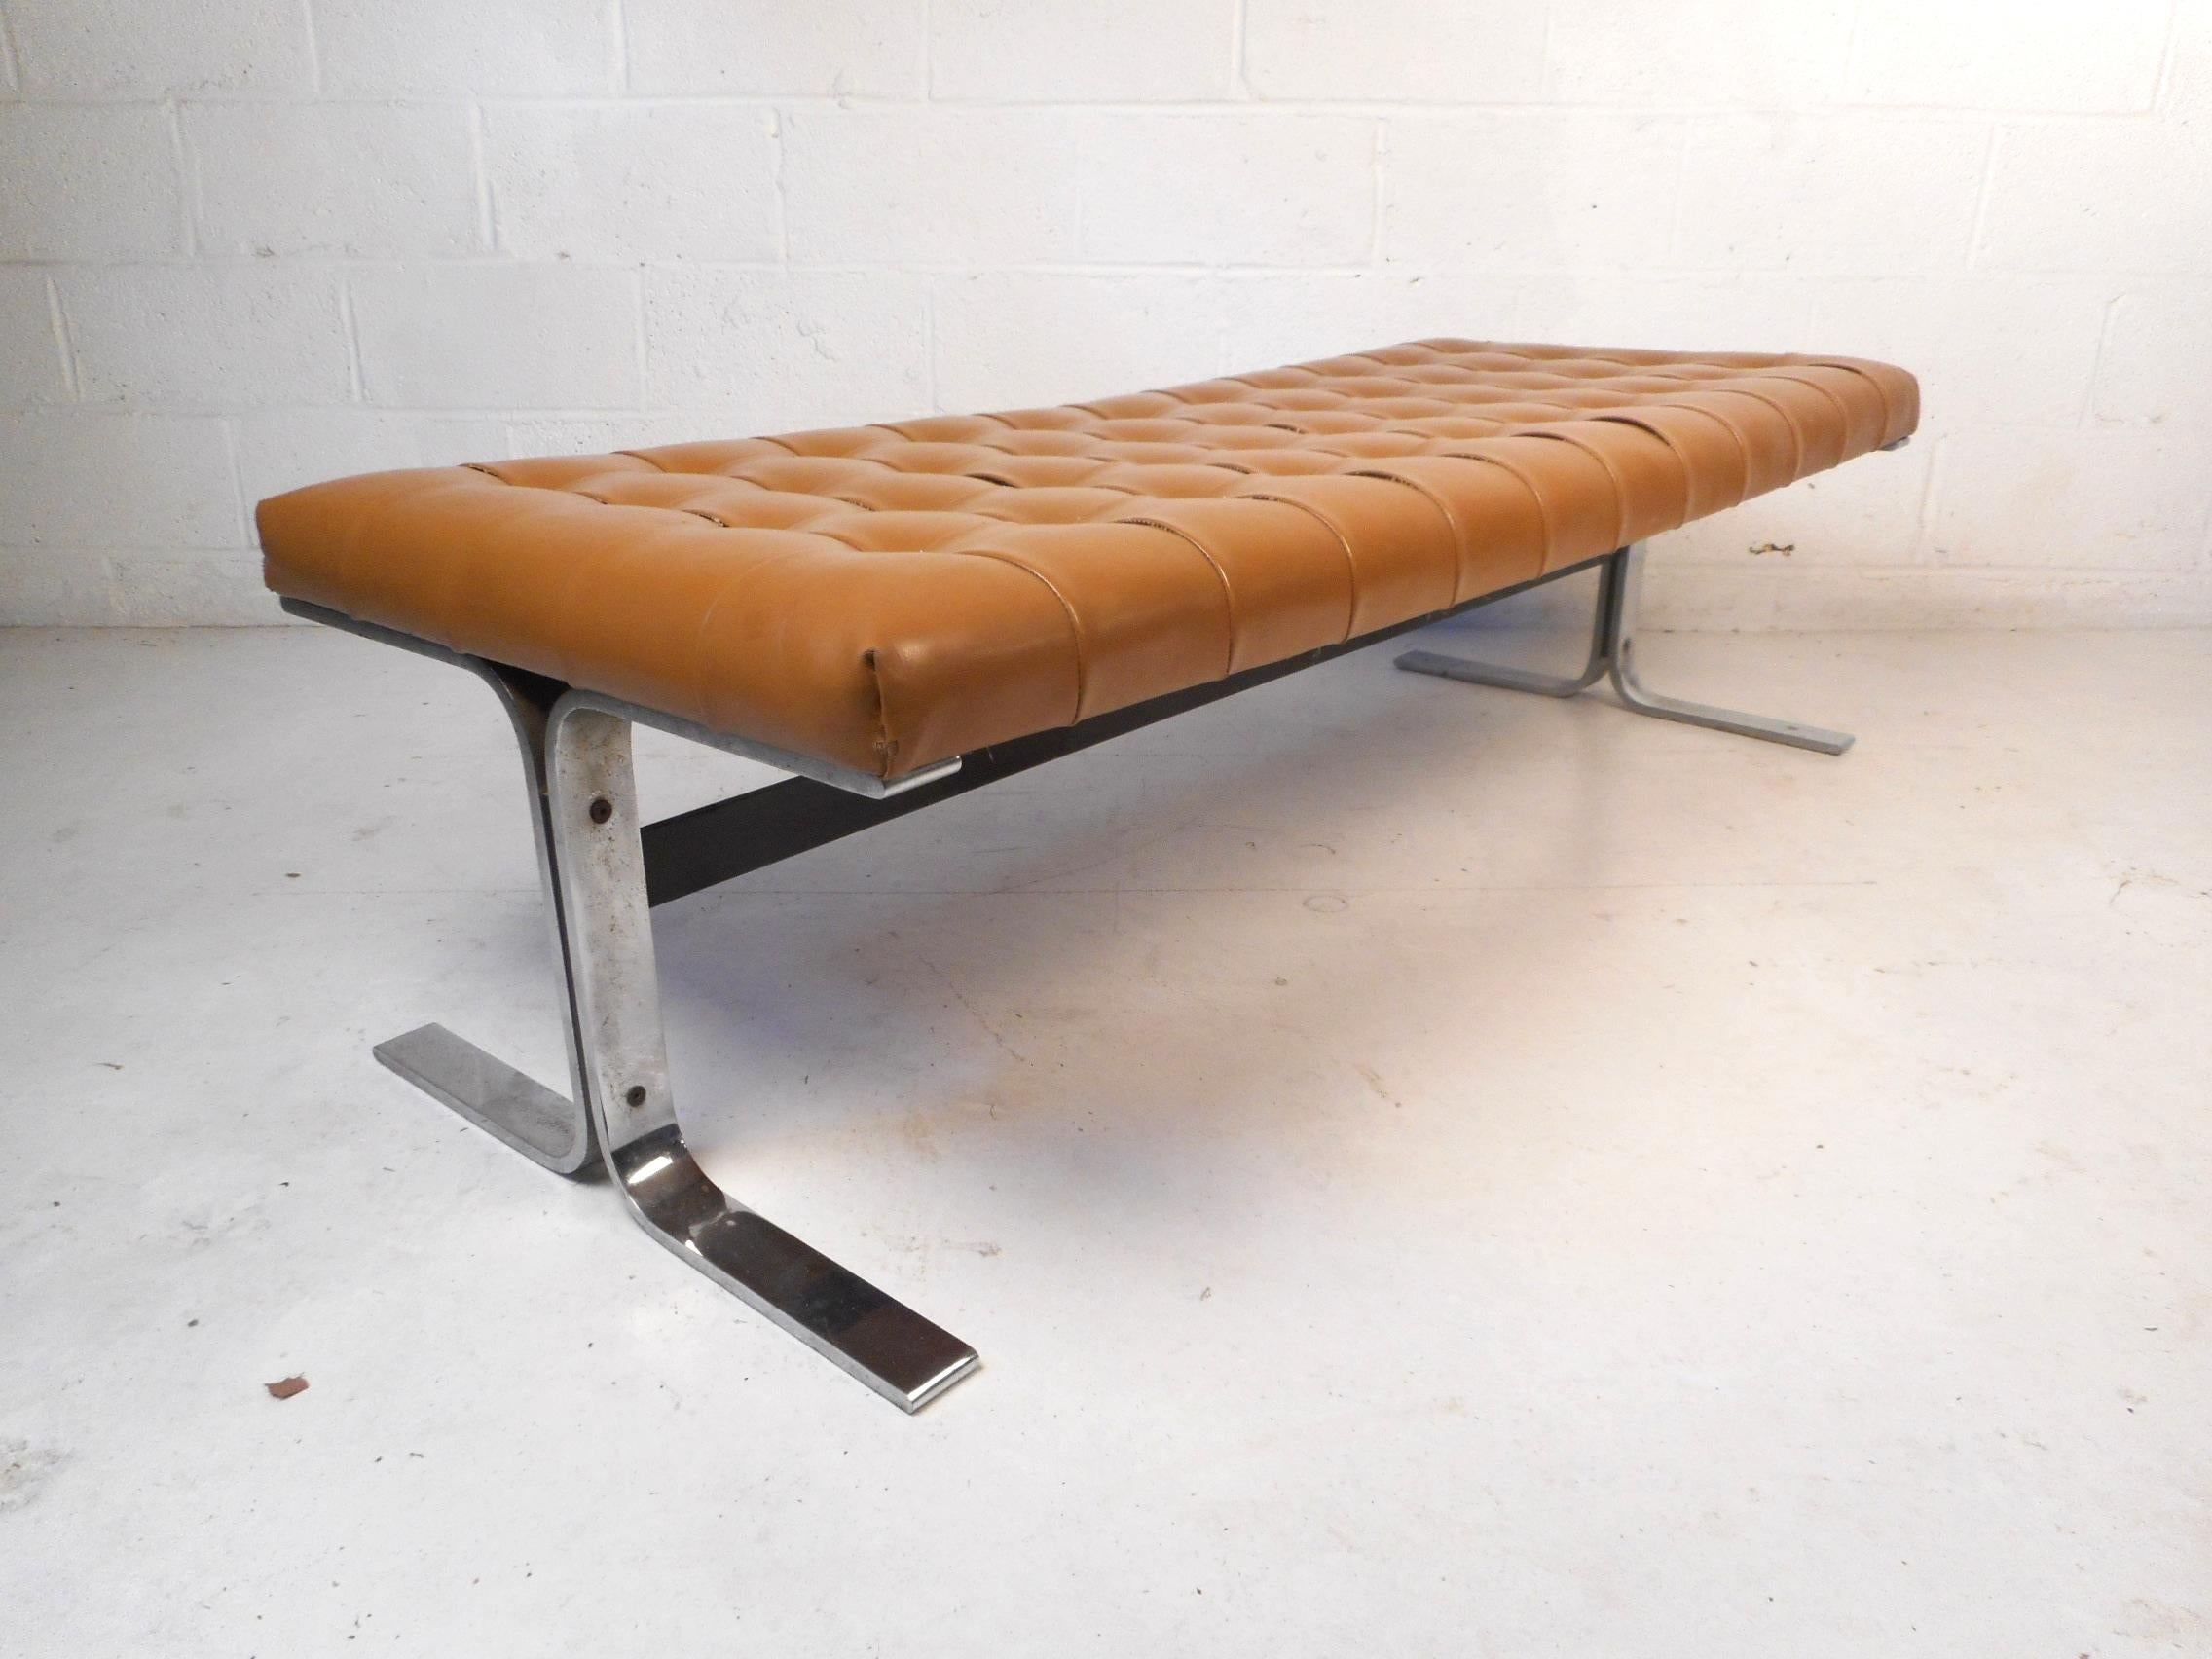 American Mid-Century Modern Tufted Faux-Leather Bench by Meuller Furniture